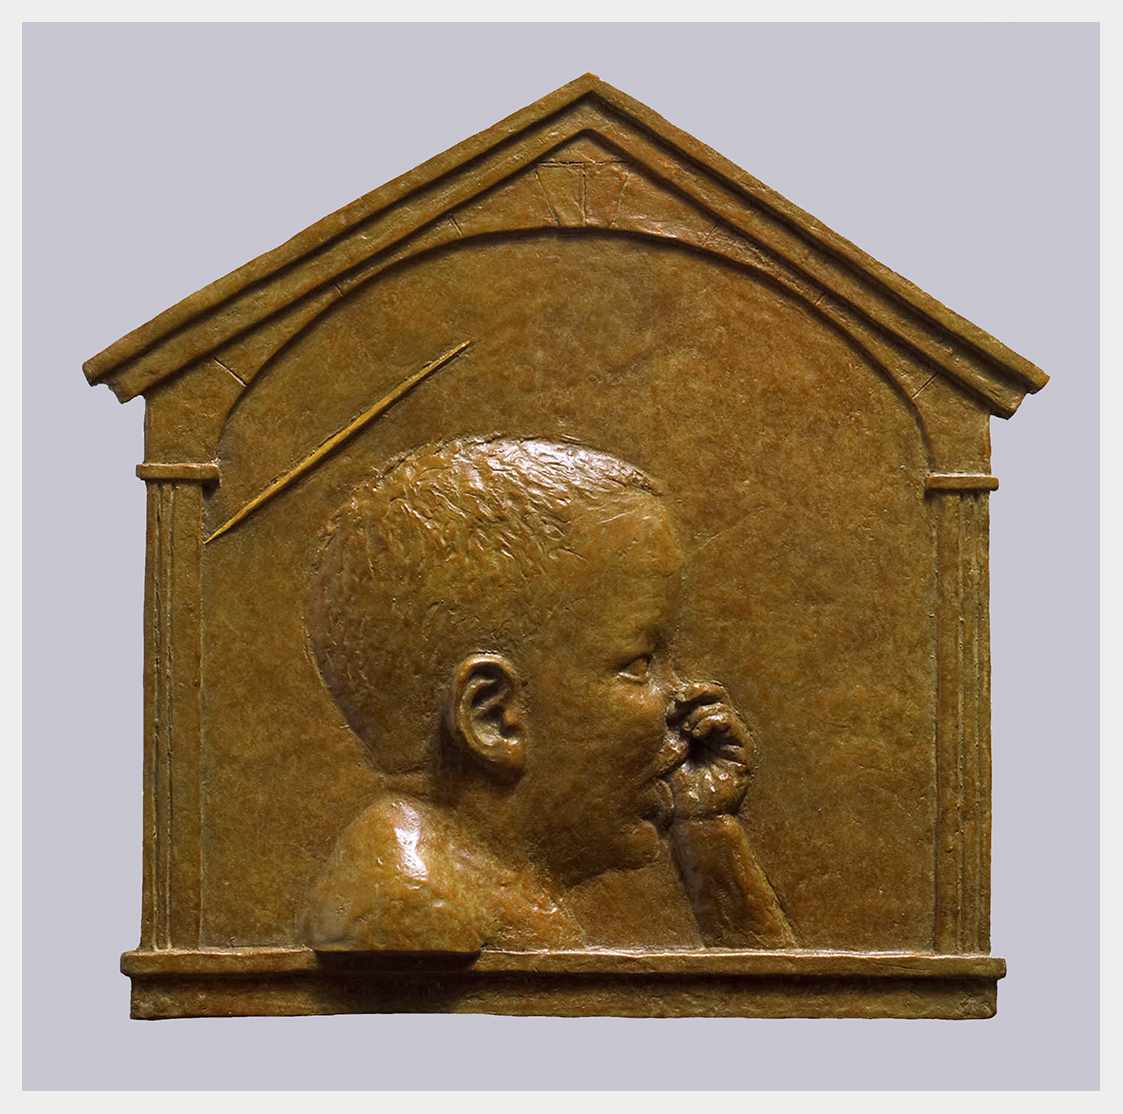 Realistic bronze bas relief sculpture of a toddler sucking his thumb with a subtle halo including framing with Renaissance architectural molding